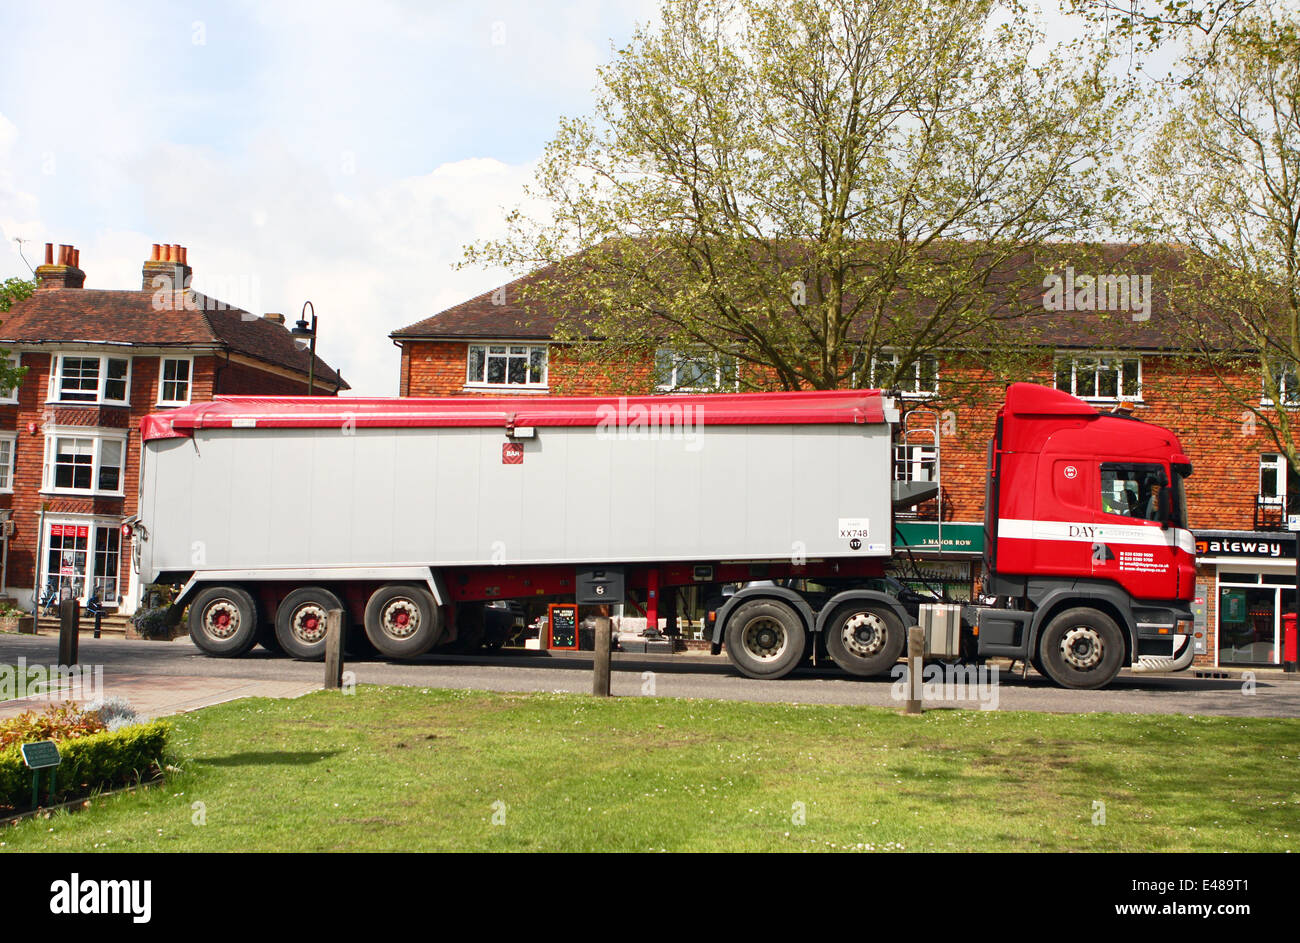 A Day Aggregates articulated tipping truck traveling through the small rural town of Tenterden in Kent, England Stock Photo